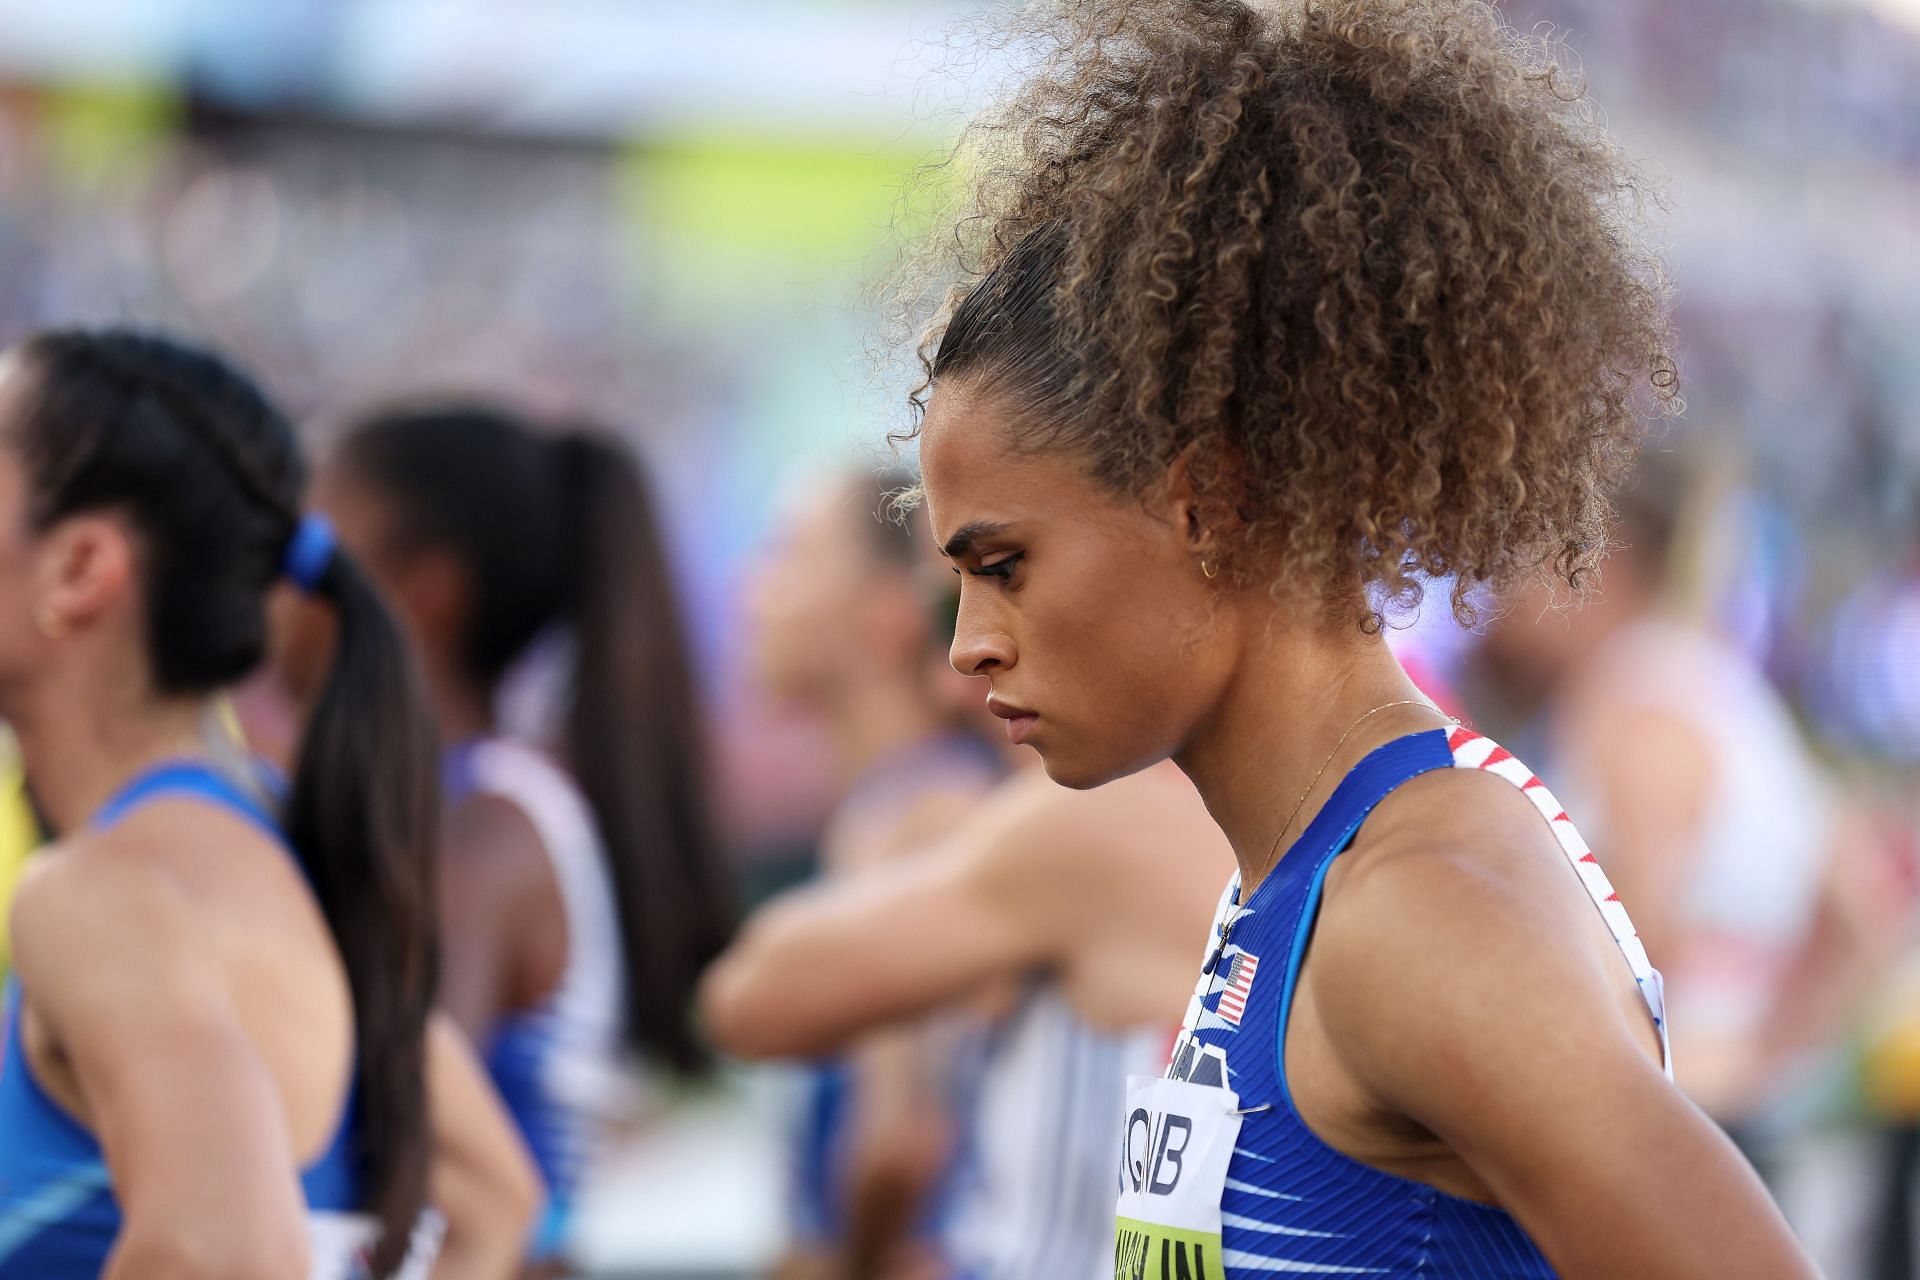 Sydney McLaughlin of Team United States looks on ahead of competing in the Women&#039;s 4x400m Relay Final on day ten of the World Athletics Championships Oregon22 at Hayward Field on July 24, 2022 in Eugene, Oregon. (Photo by Patrick Smith/Getty Images)